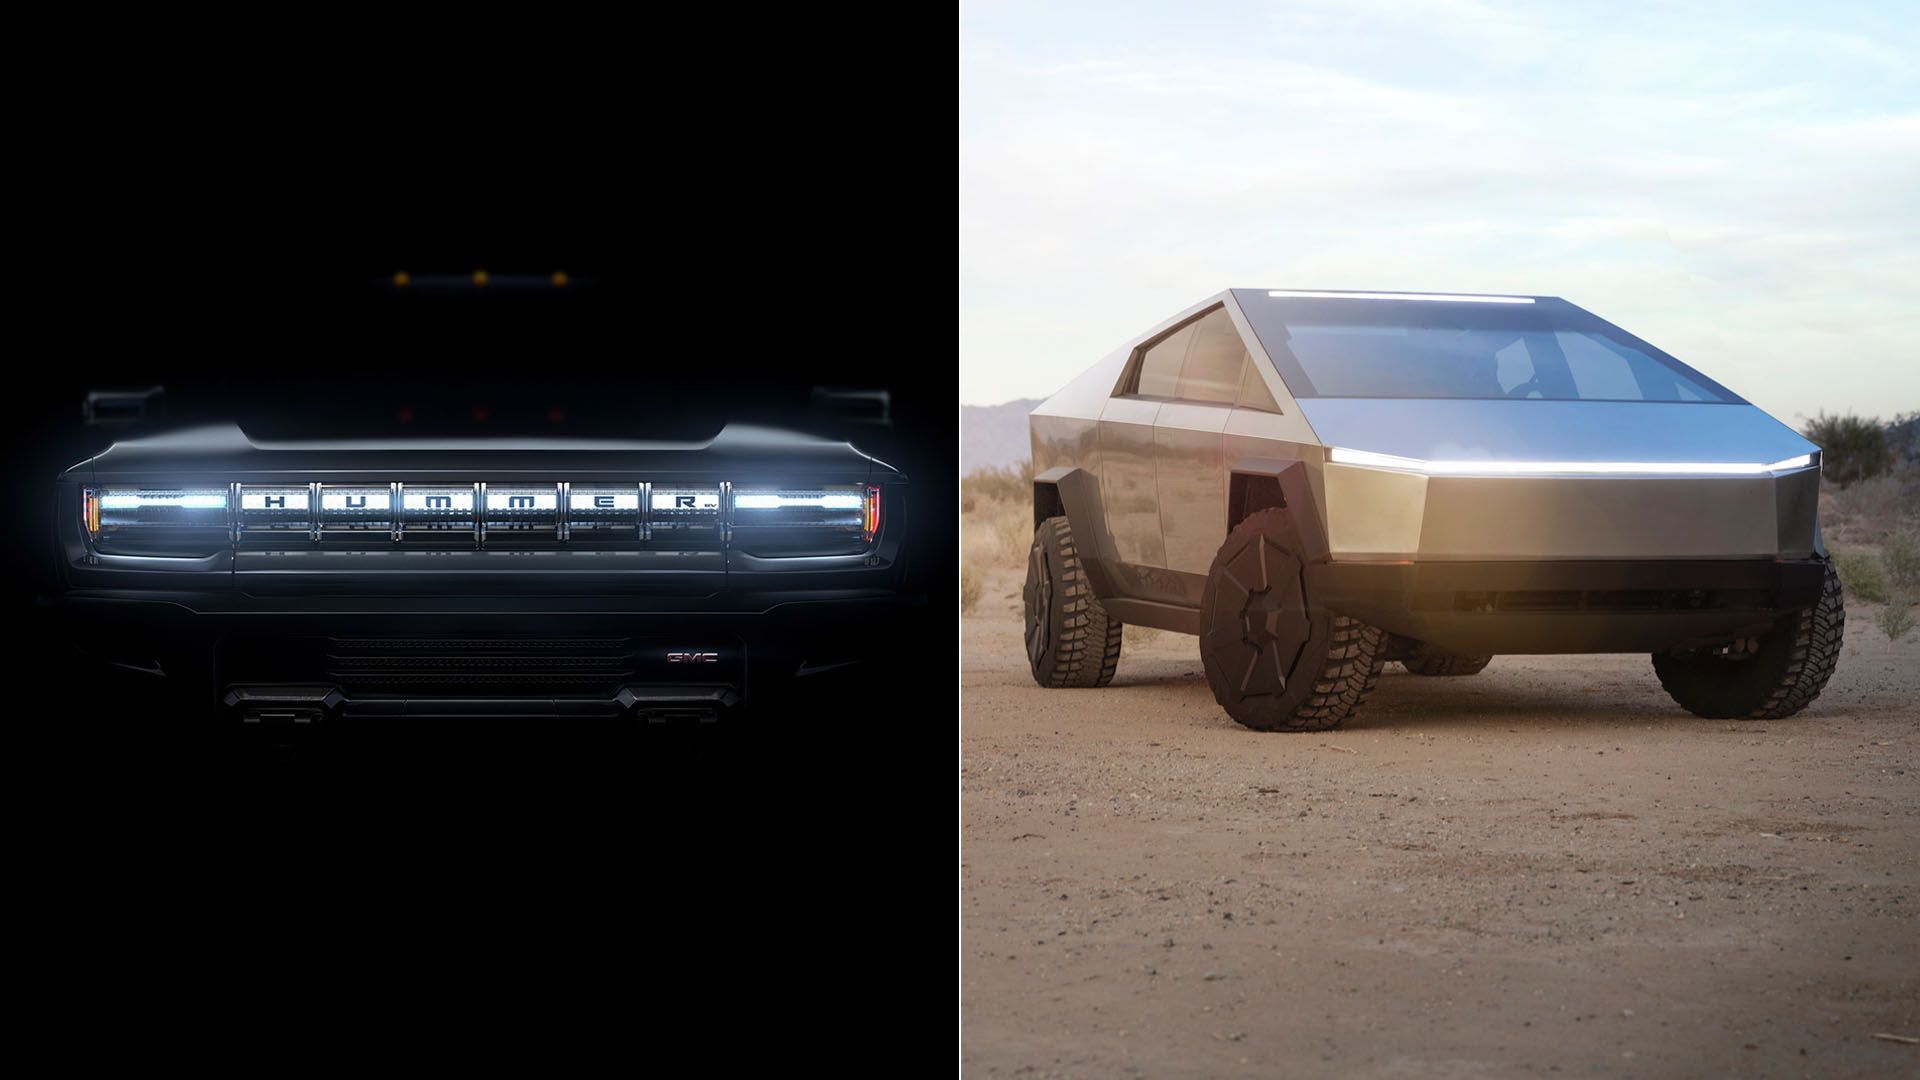 A split screen photo of GMC Hummer's grille and the Tesla cybertruck.